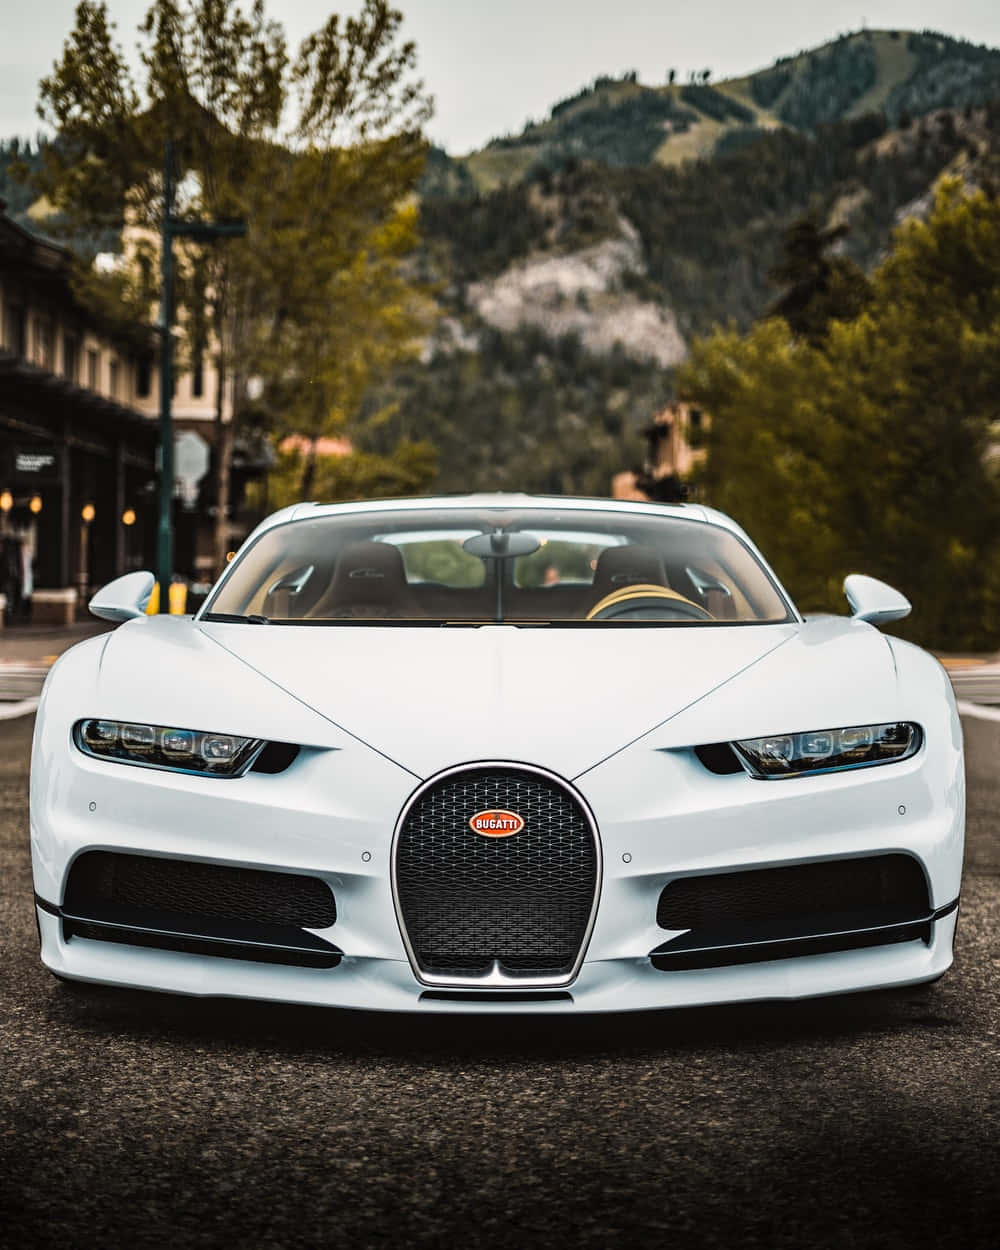 Luxury On The Road - Experience The Best With Bugatti